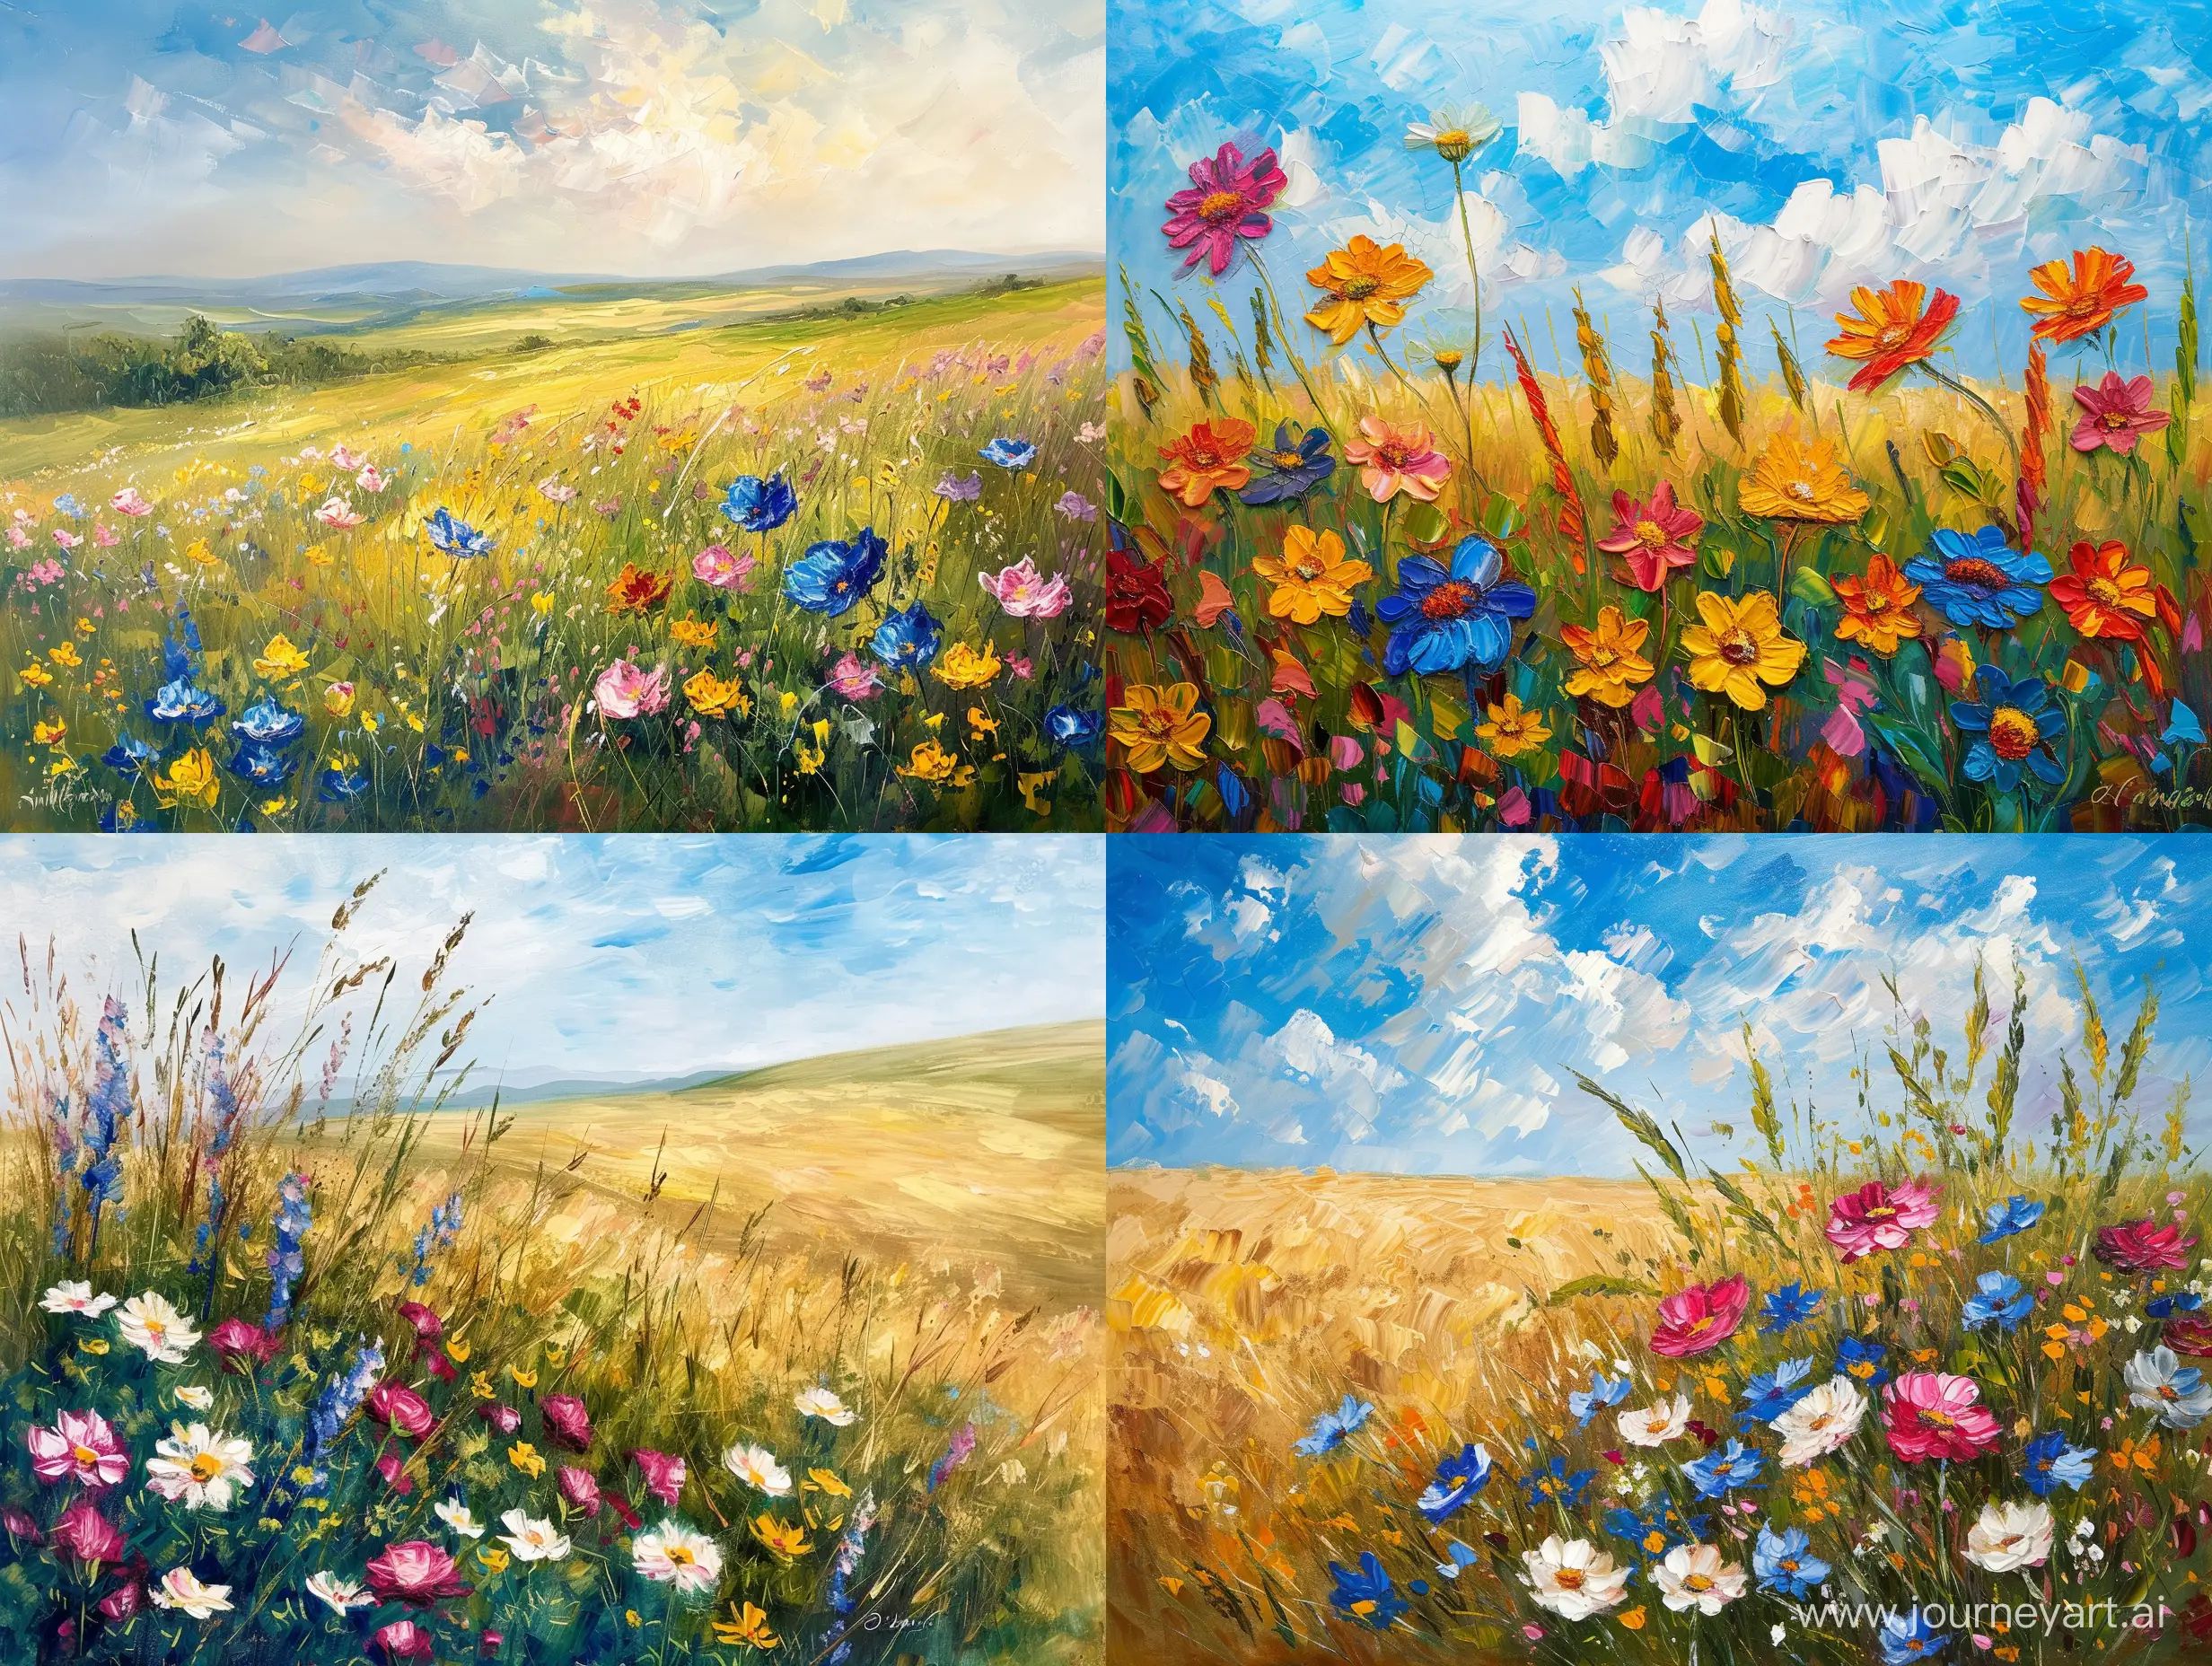 Vintage-Wild-Style-Field-Painting-with-Broad-Brush-Strokes-Flower-Oil-Art-Print-Landscape